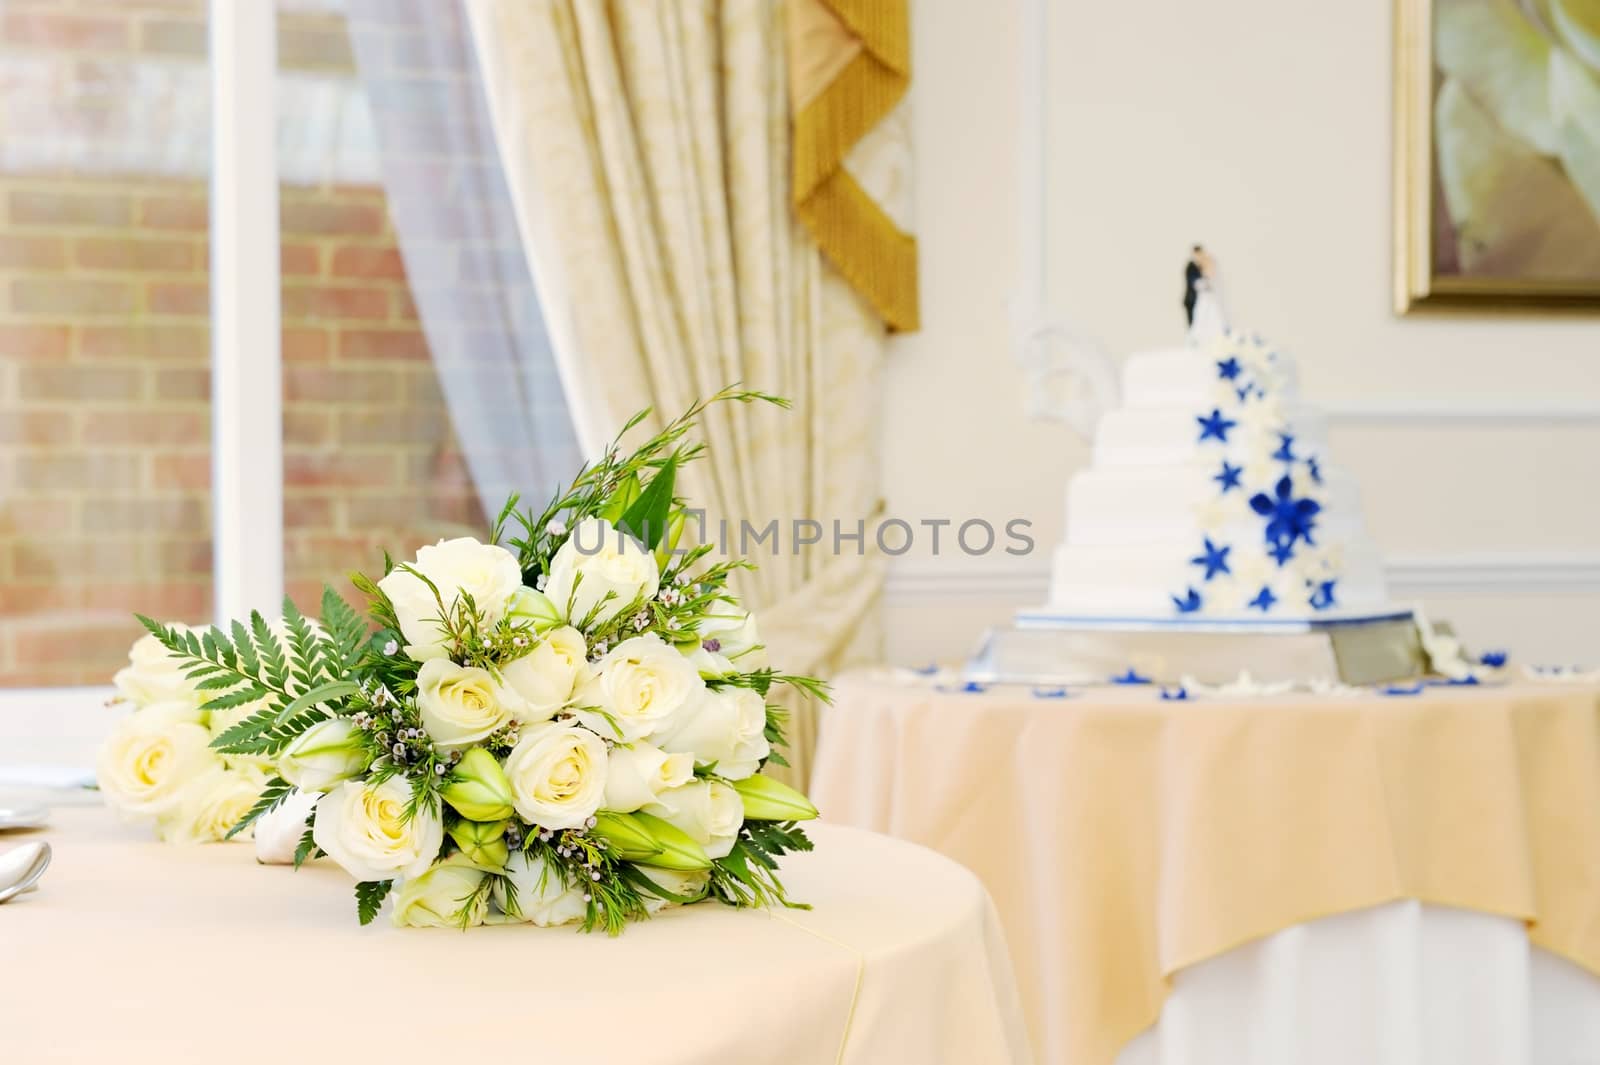 Wedding reception with flowers and cake decoration